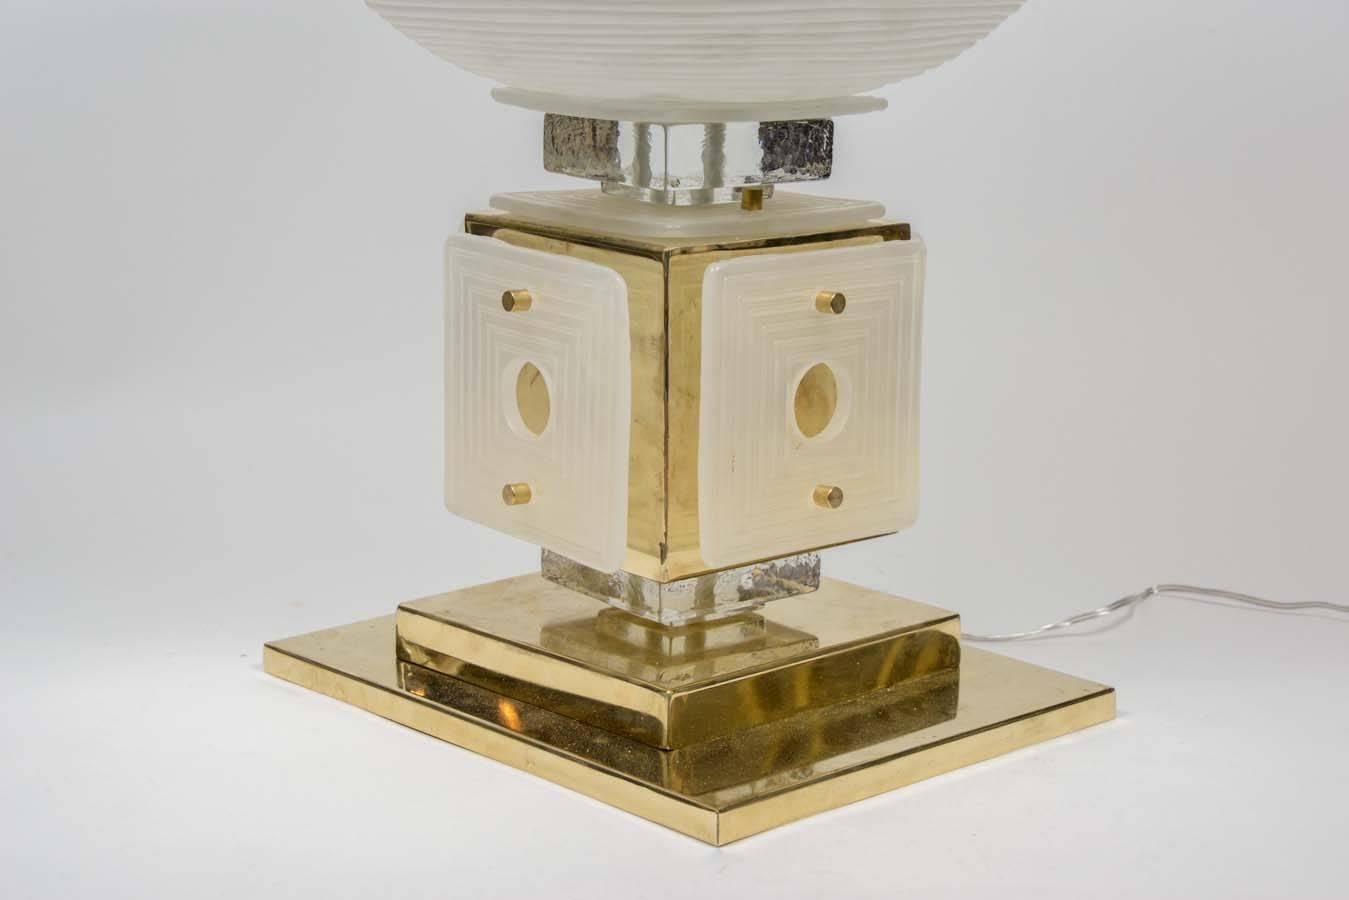 Impressively big table lamp made of brass foot, clear Murano glass and white glass panels; everything topped by a big textured white glass globe.

One lamp available